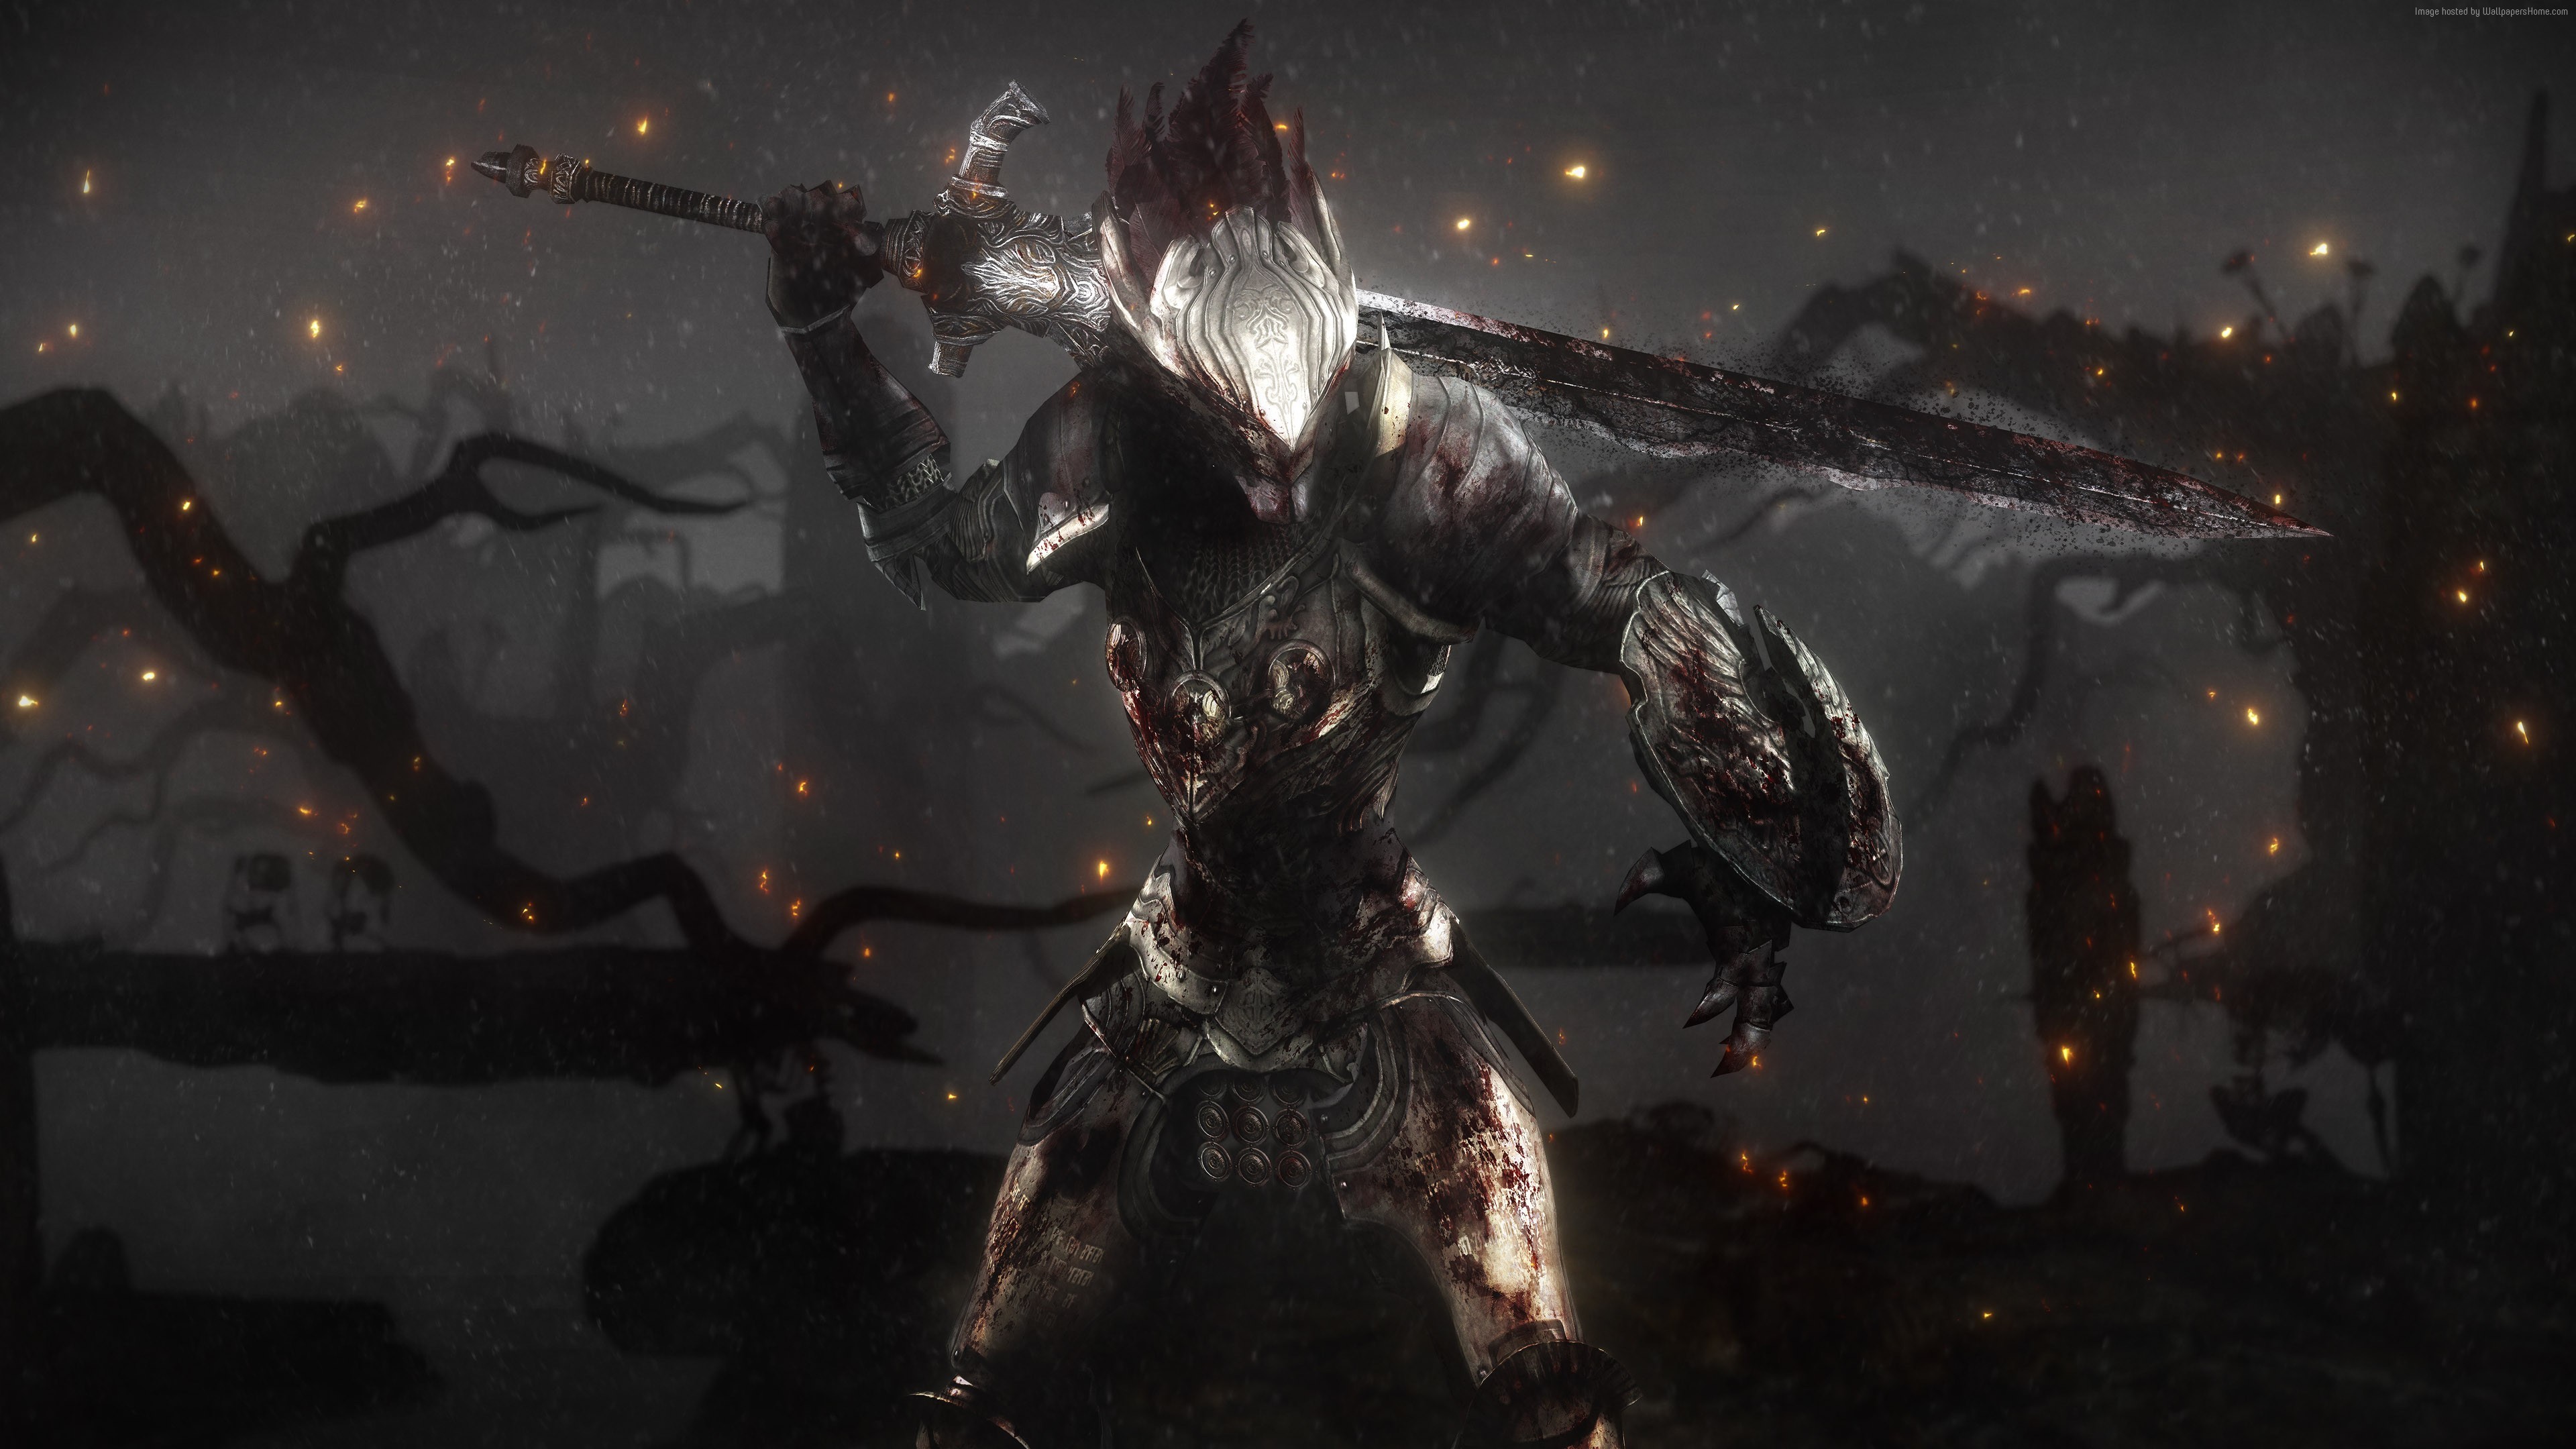 3840x2160 September 29, 2015 By Stephen Comments Off on Dark Souls 3 Wallpaper .